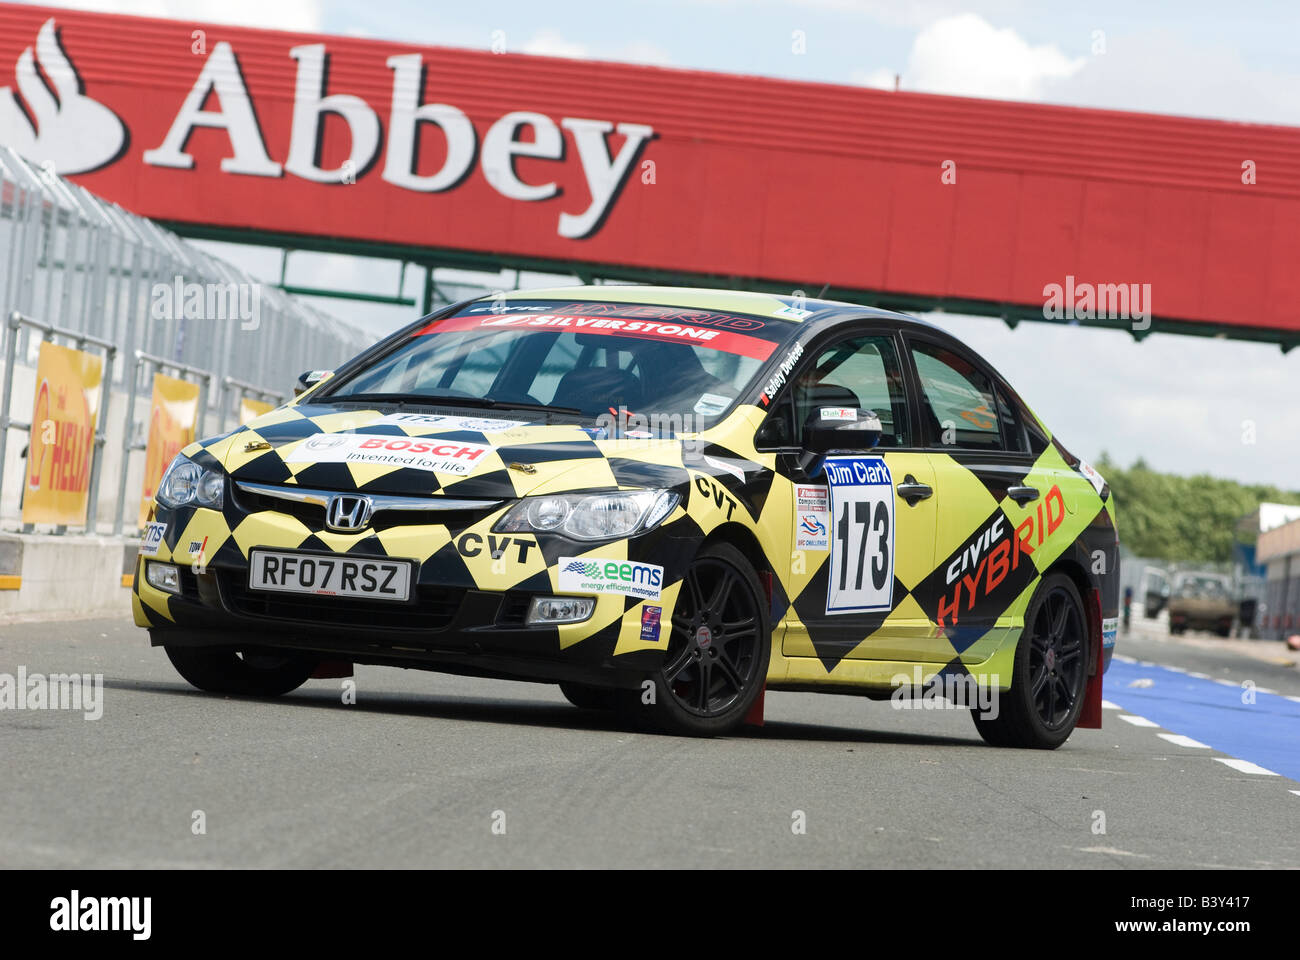 Oaktec Honda civic hybrid car in racing colours at silverstone circuit in  the uk Stock Photo - Alamy